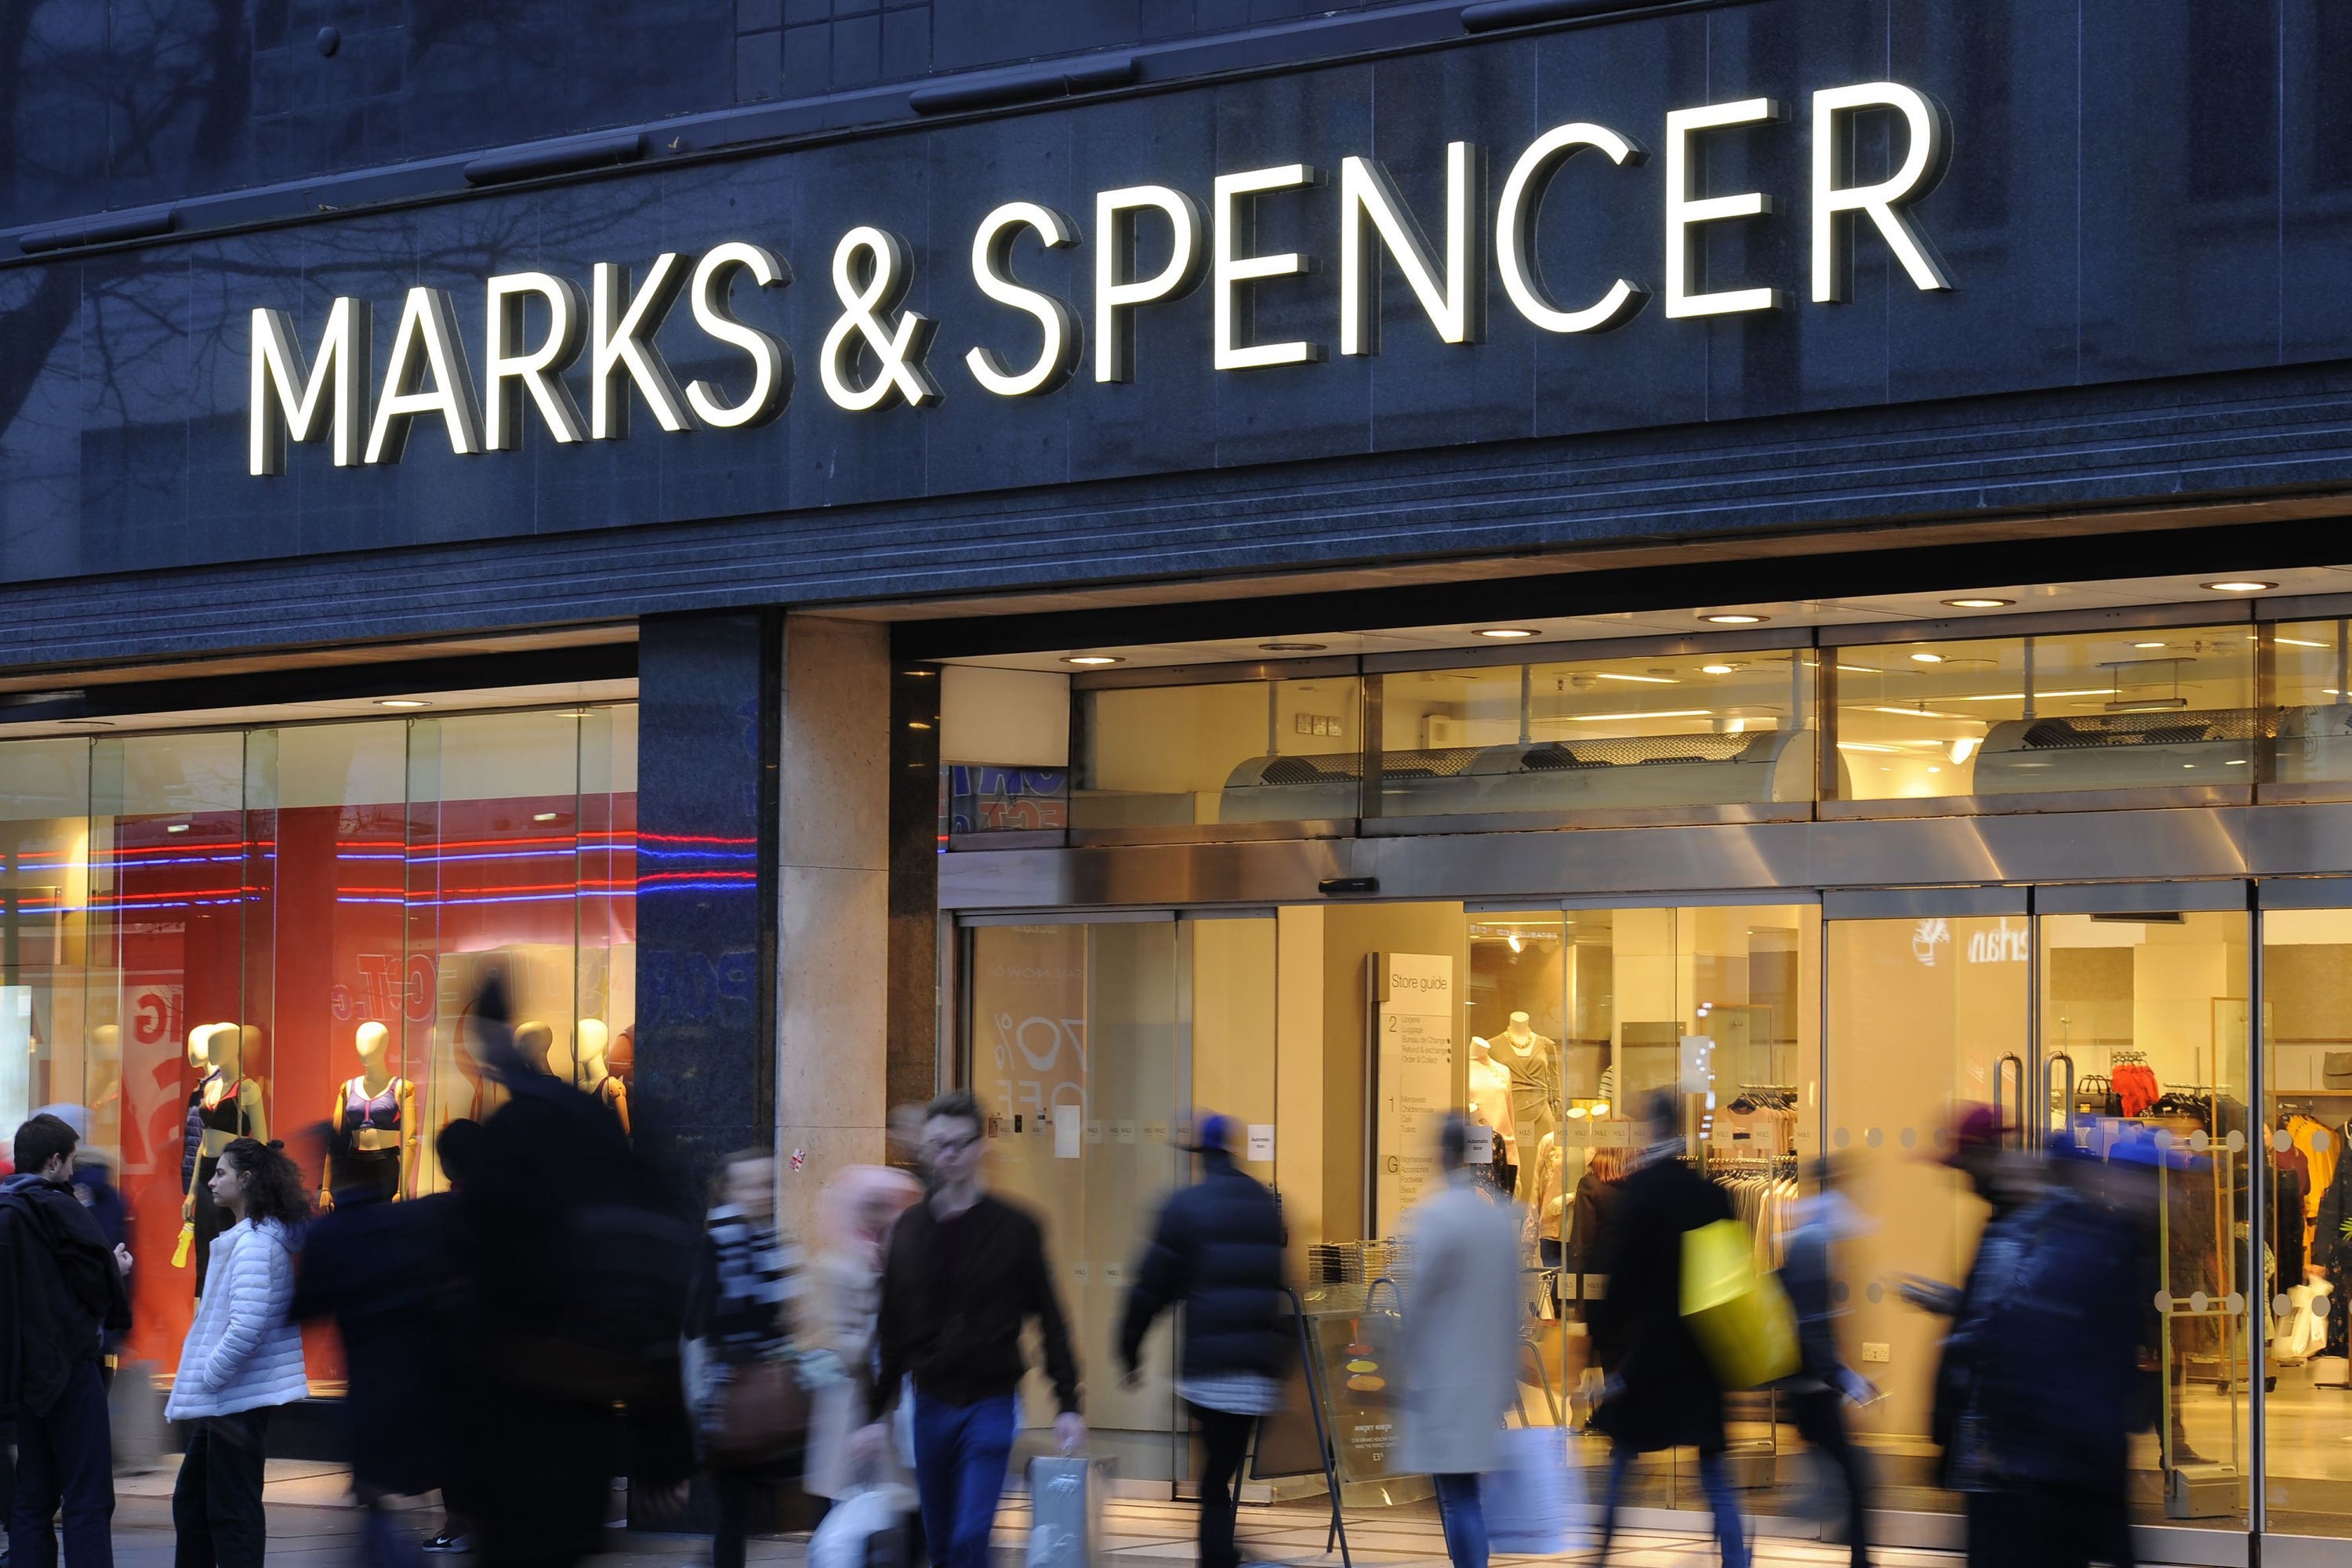 Marks & Spencer will overtake John Lewis in the rankings of the UK’s biggest retailers by 2026, according to a forecast by industry title Retail Week (Charlotte Ball/PA)